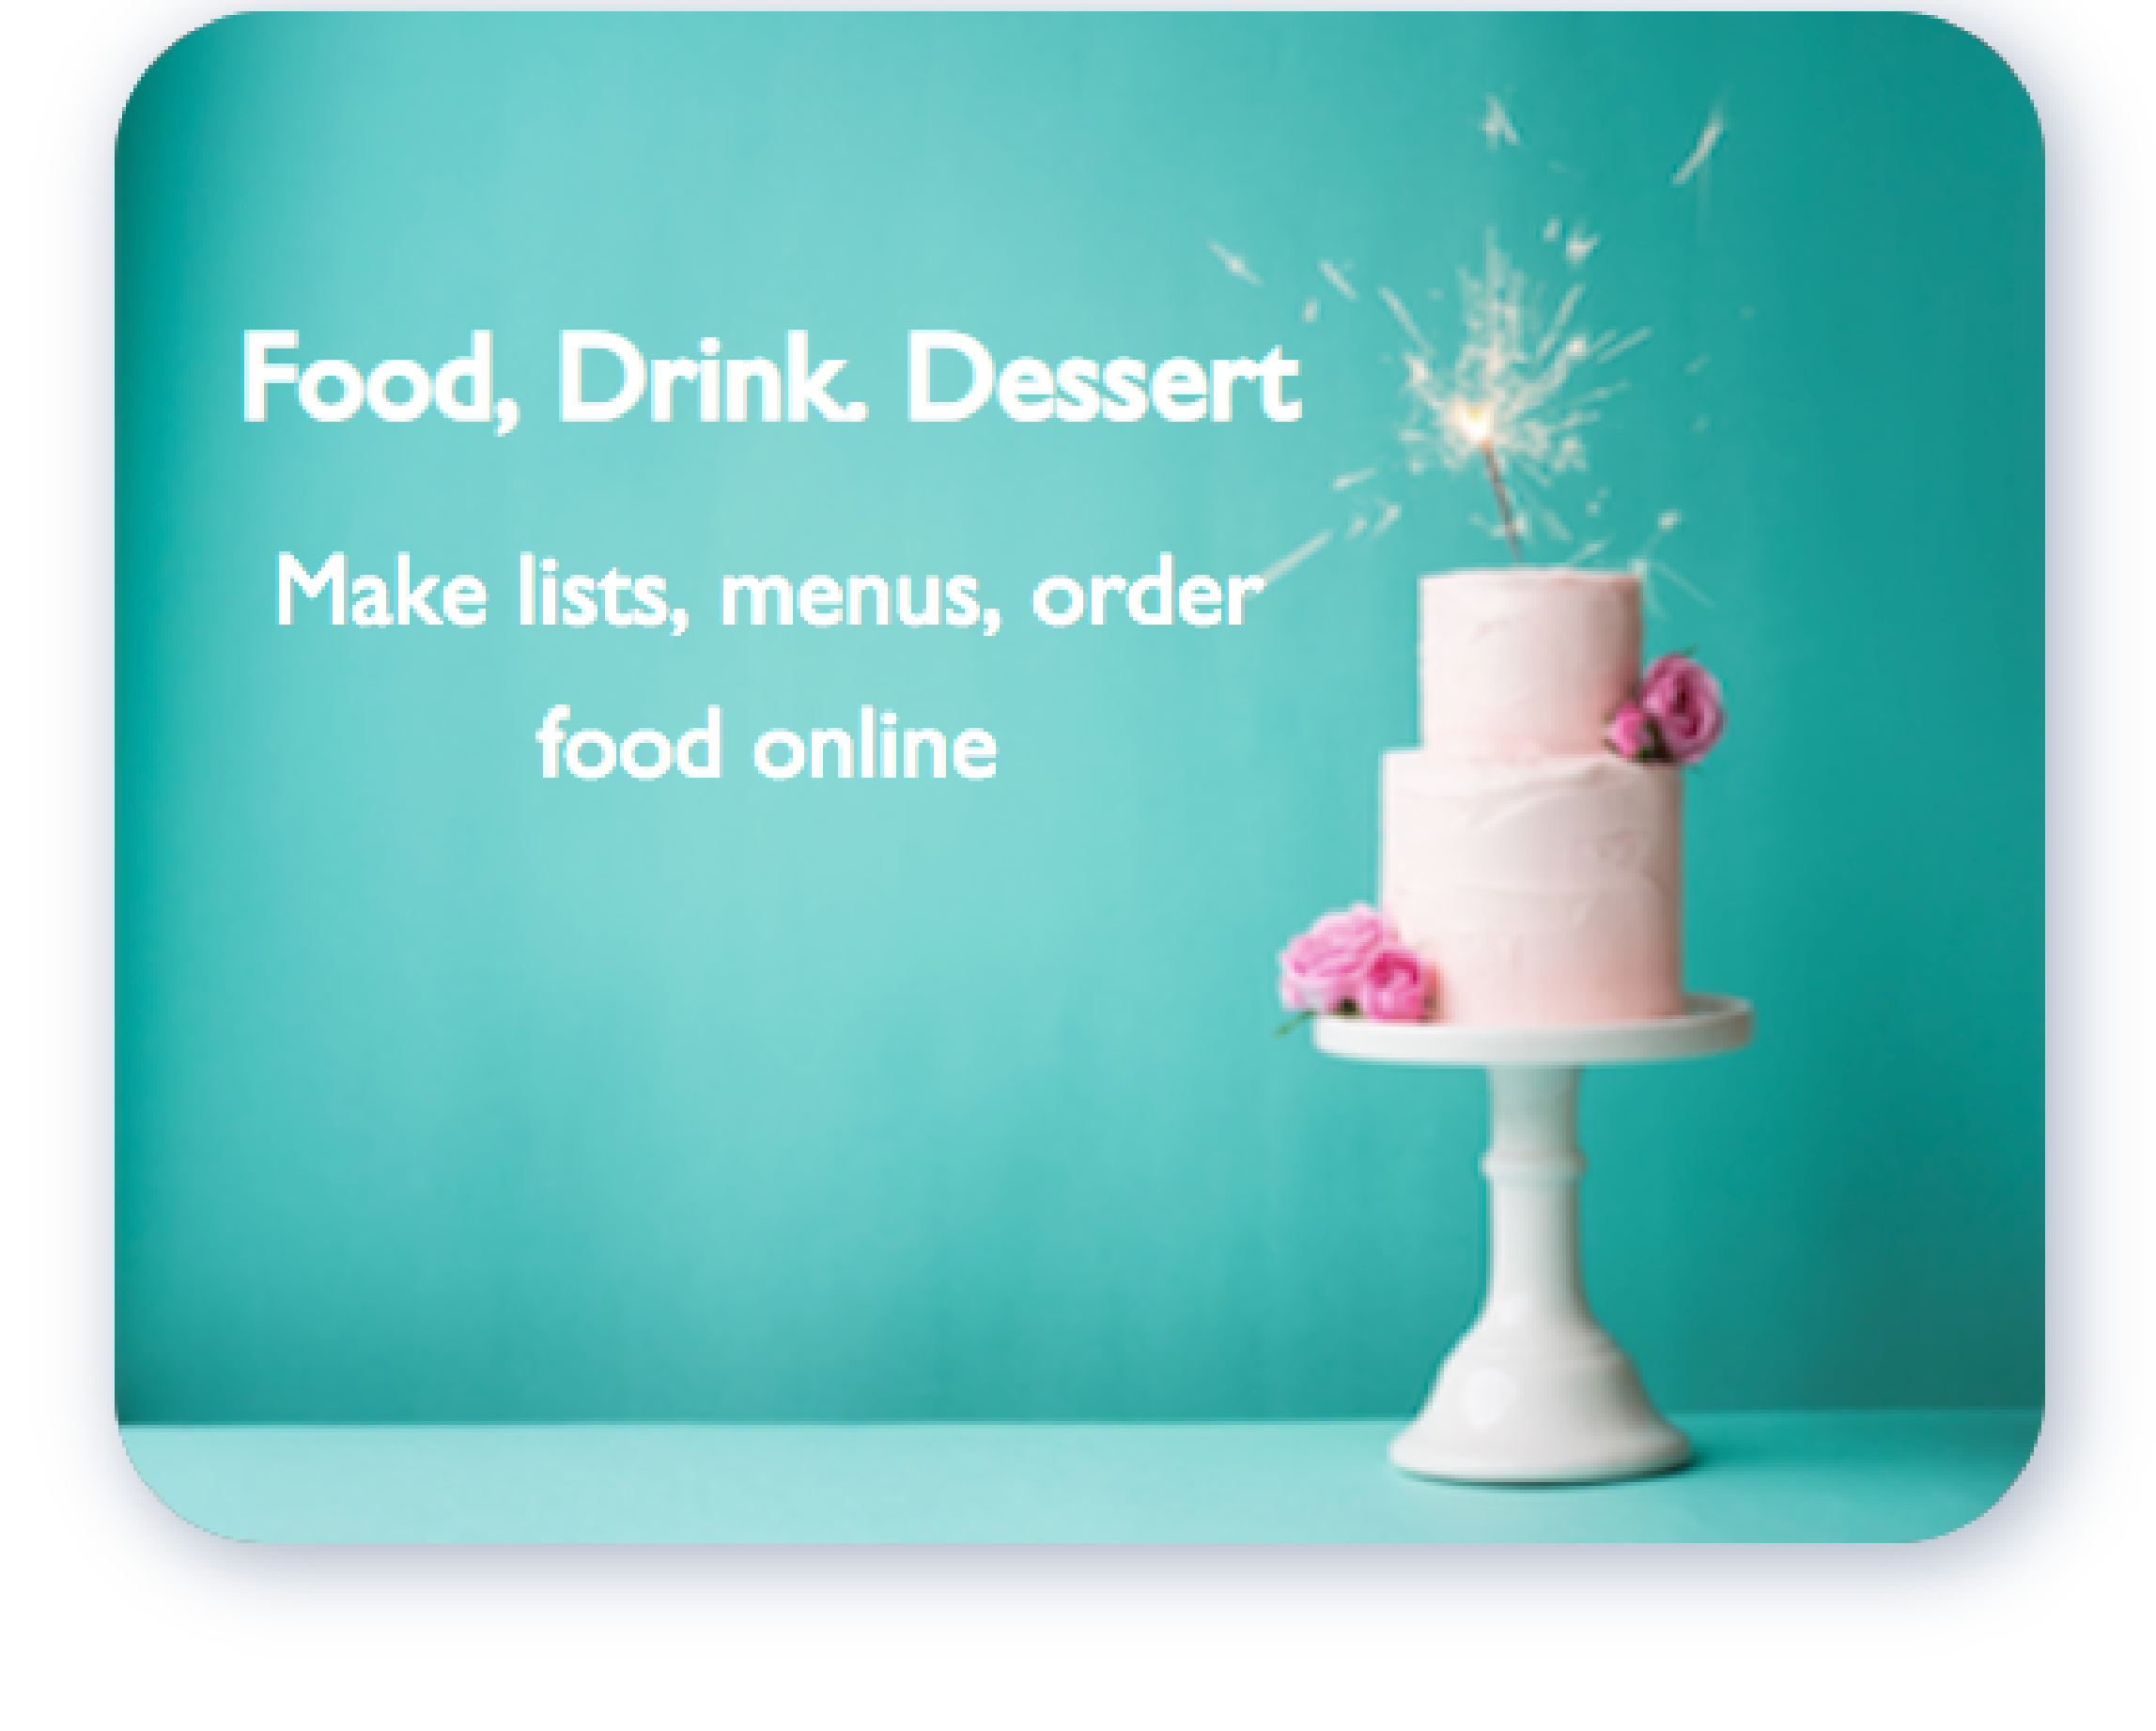 Food & Drink & Dessert Everything you need, create lists & order food online
                            